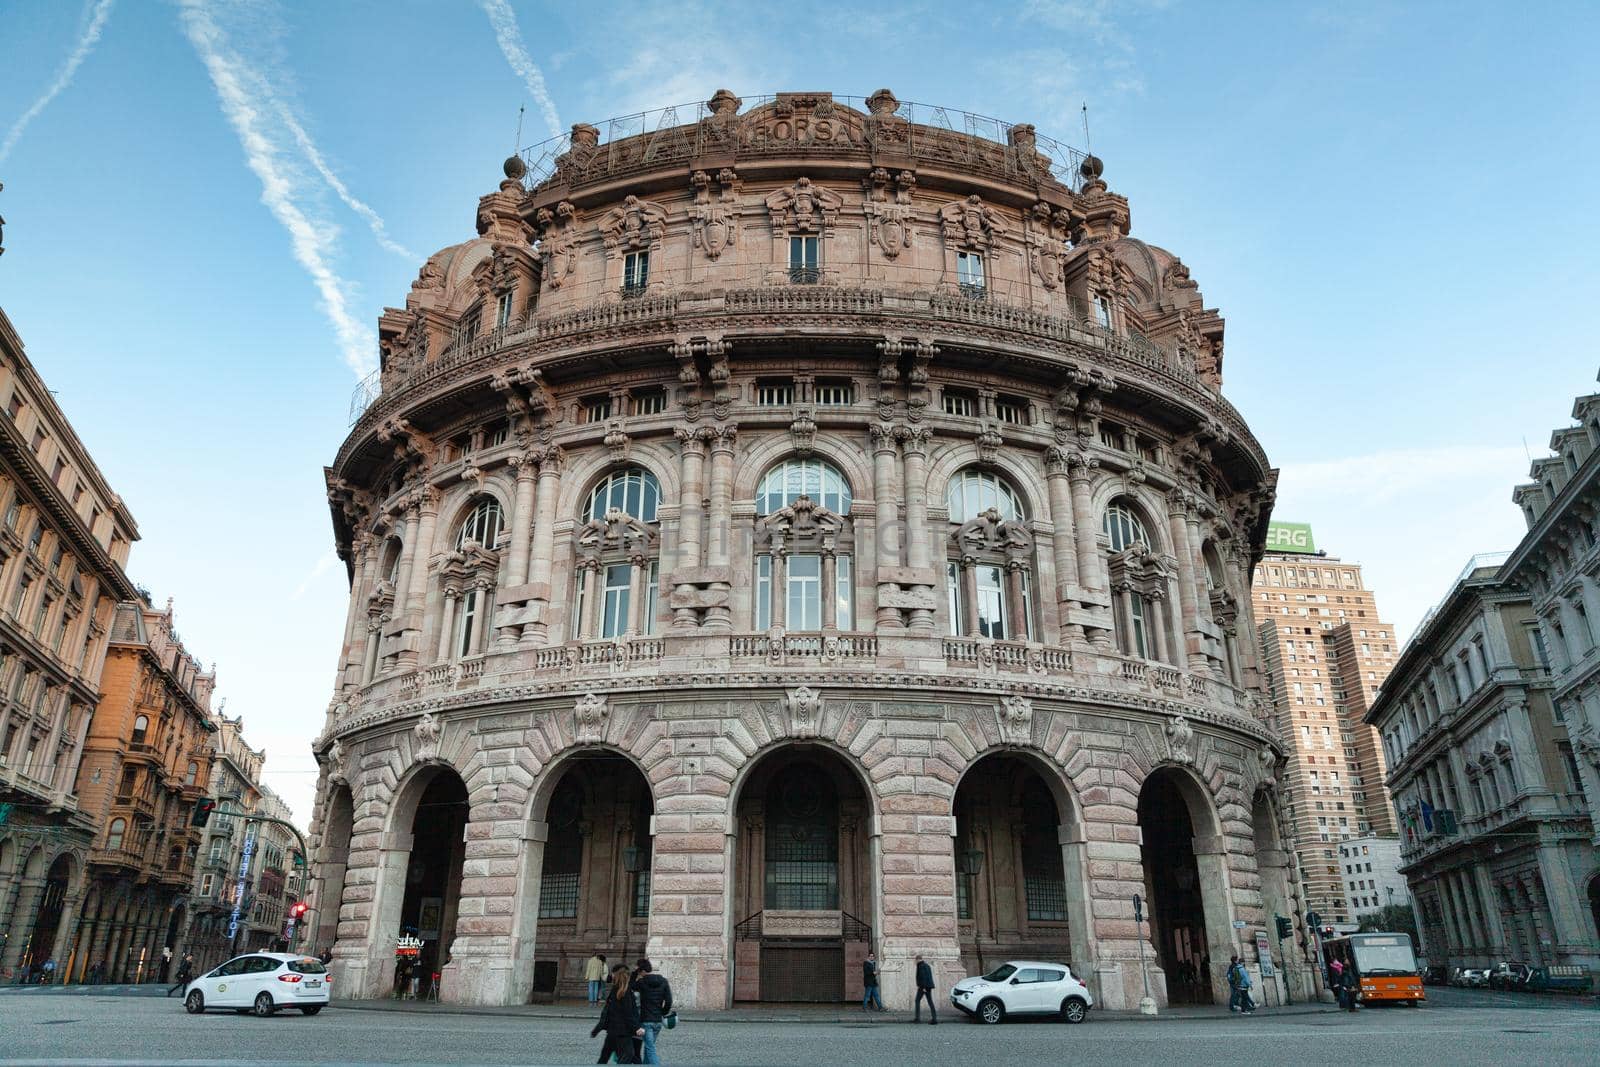 Genoa, Italy - 1 April 2015: the palace of the New Stock Exchange